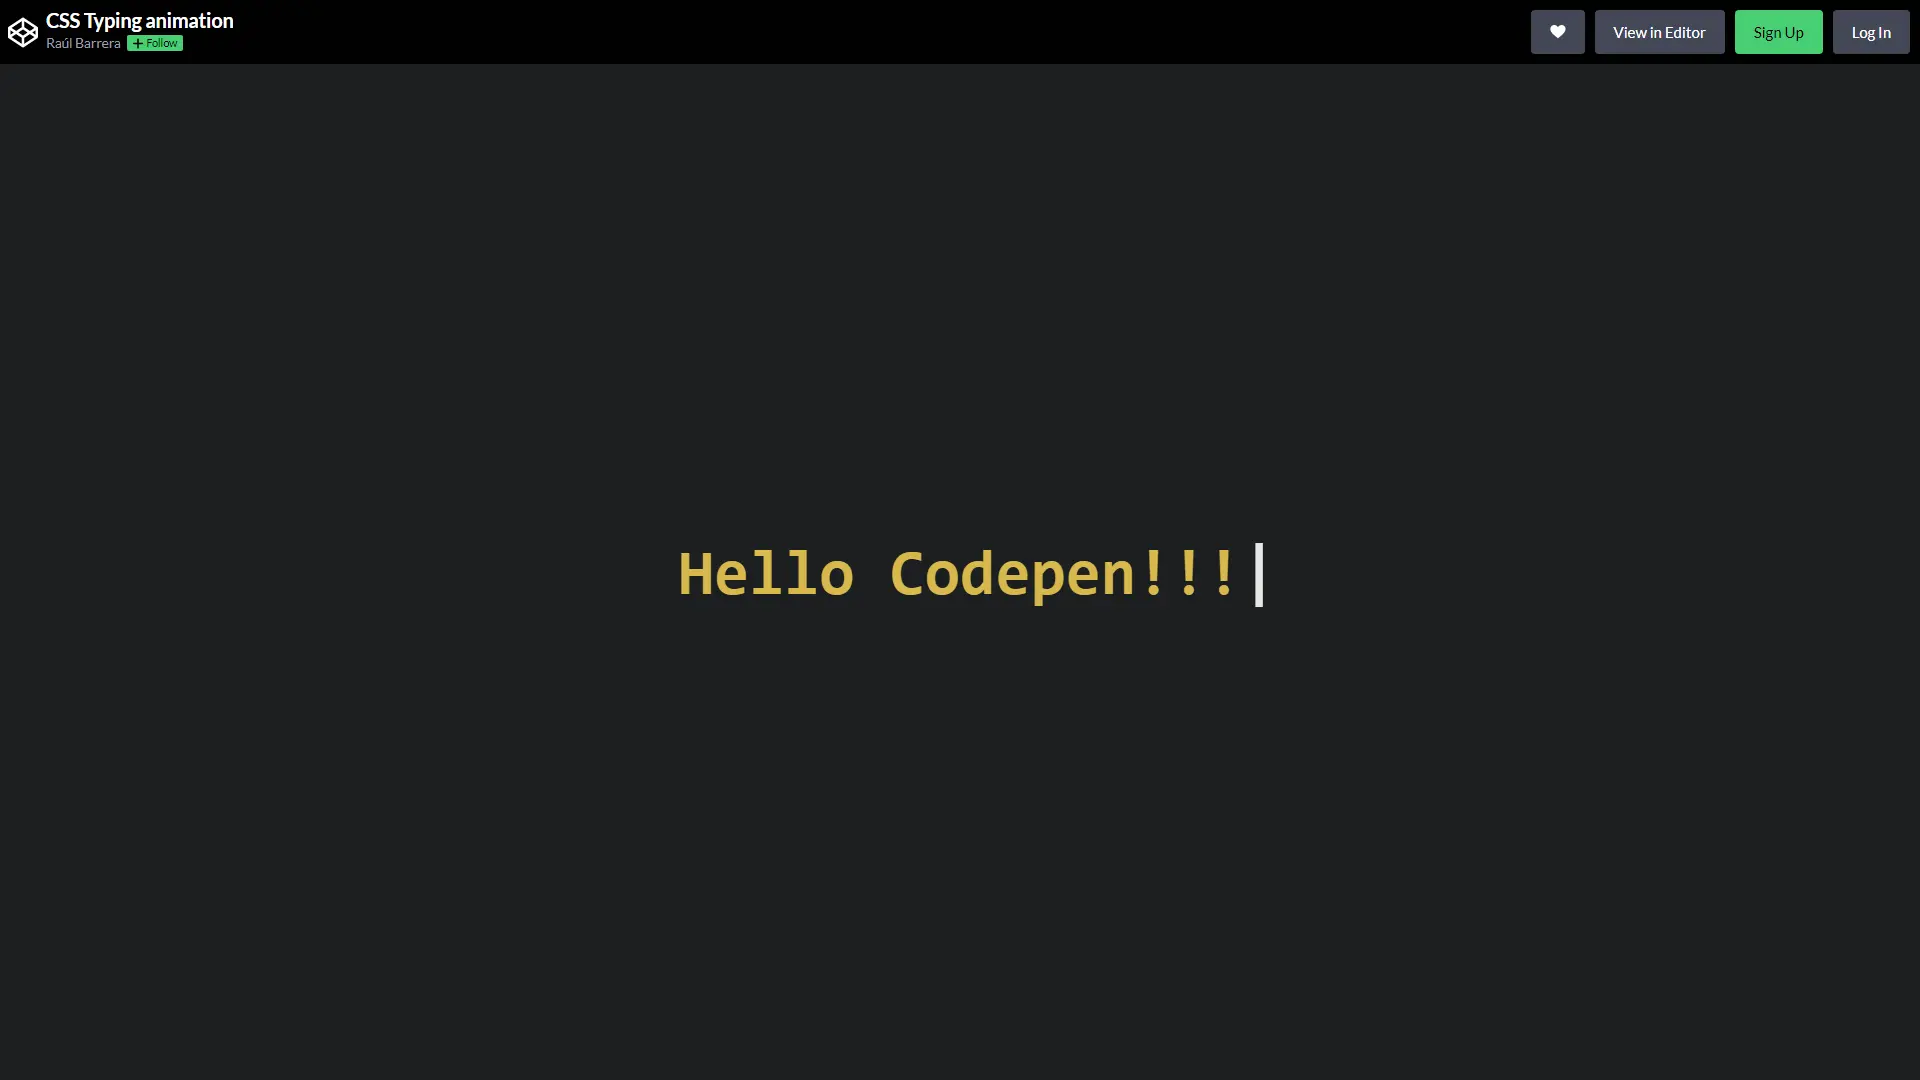 CSS Typing Animation